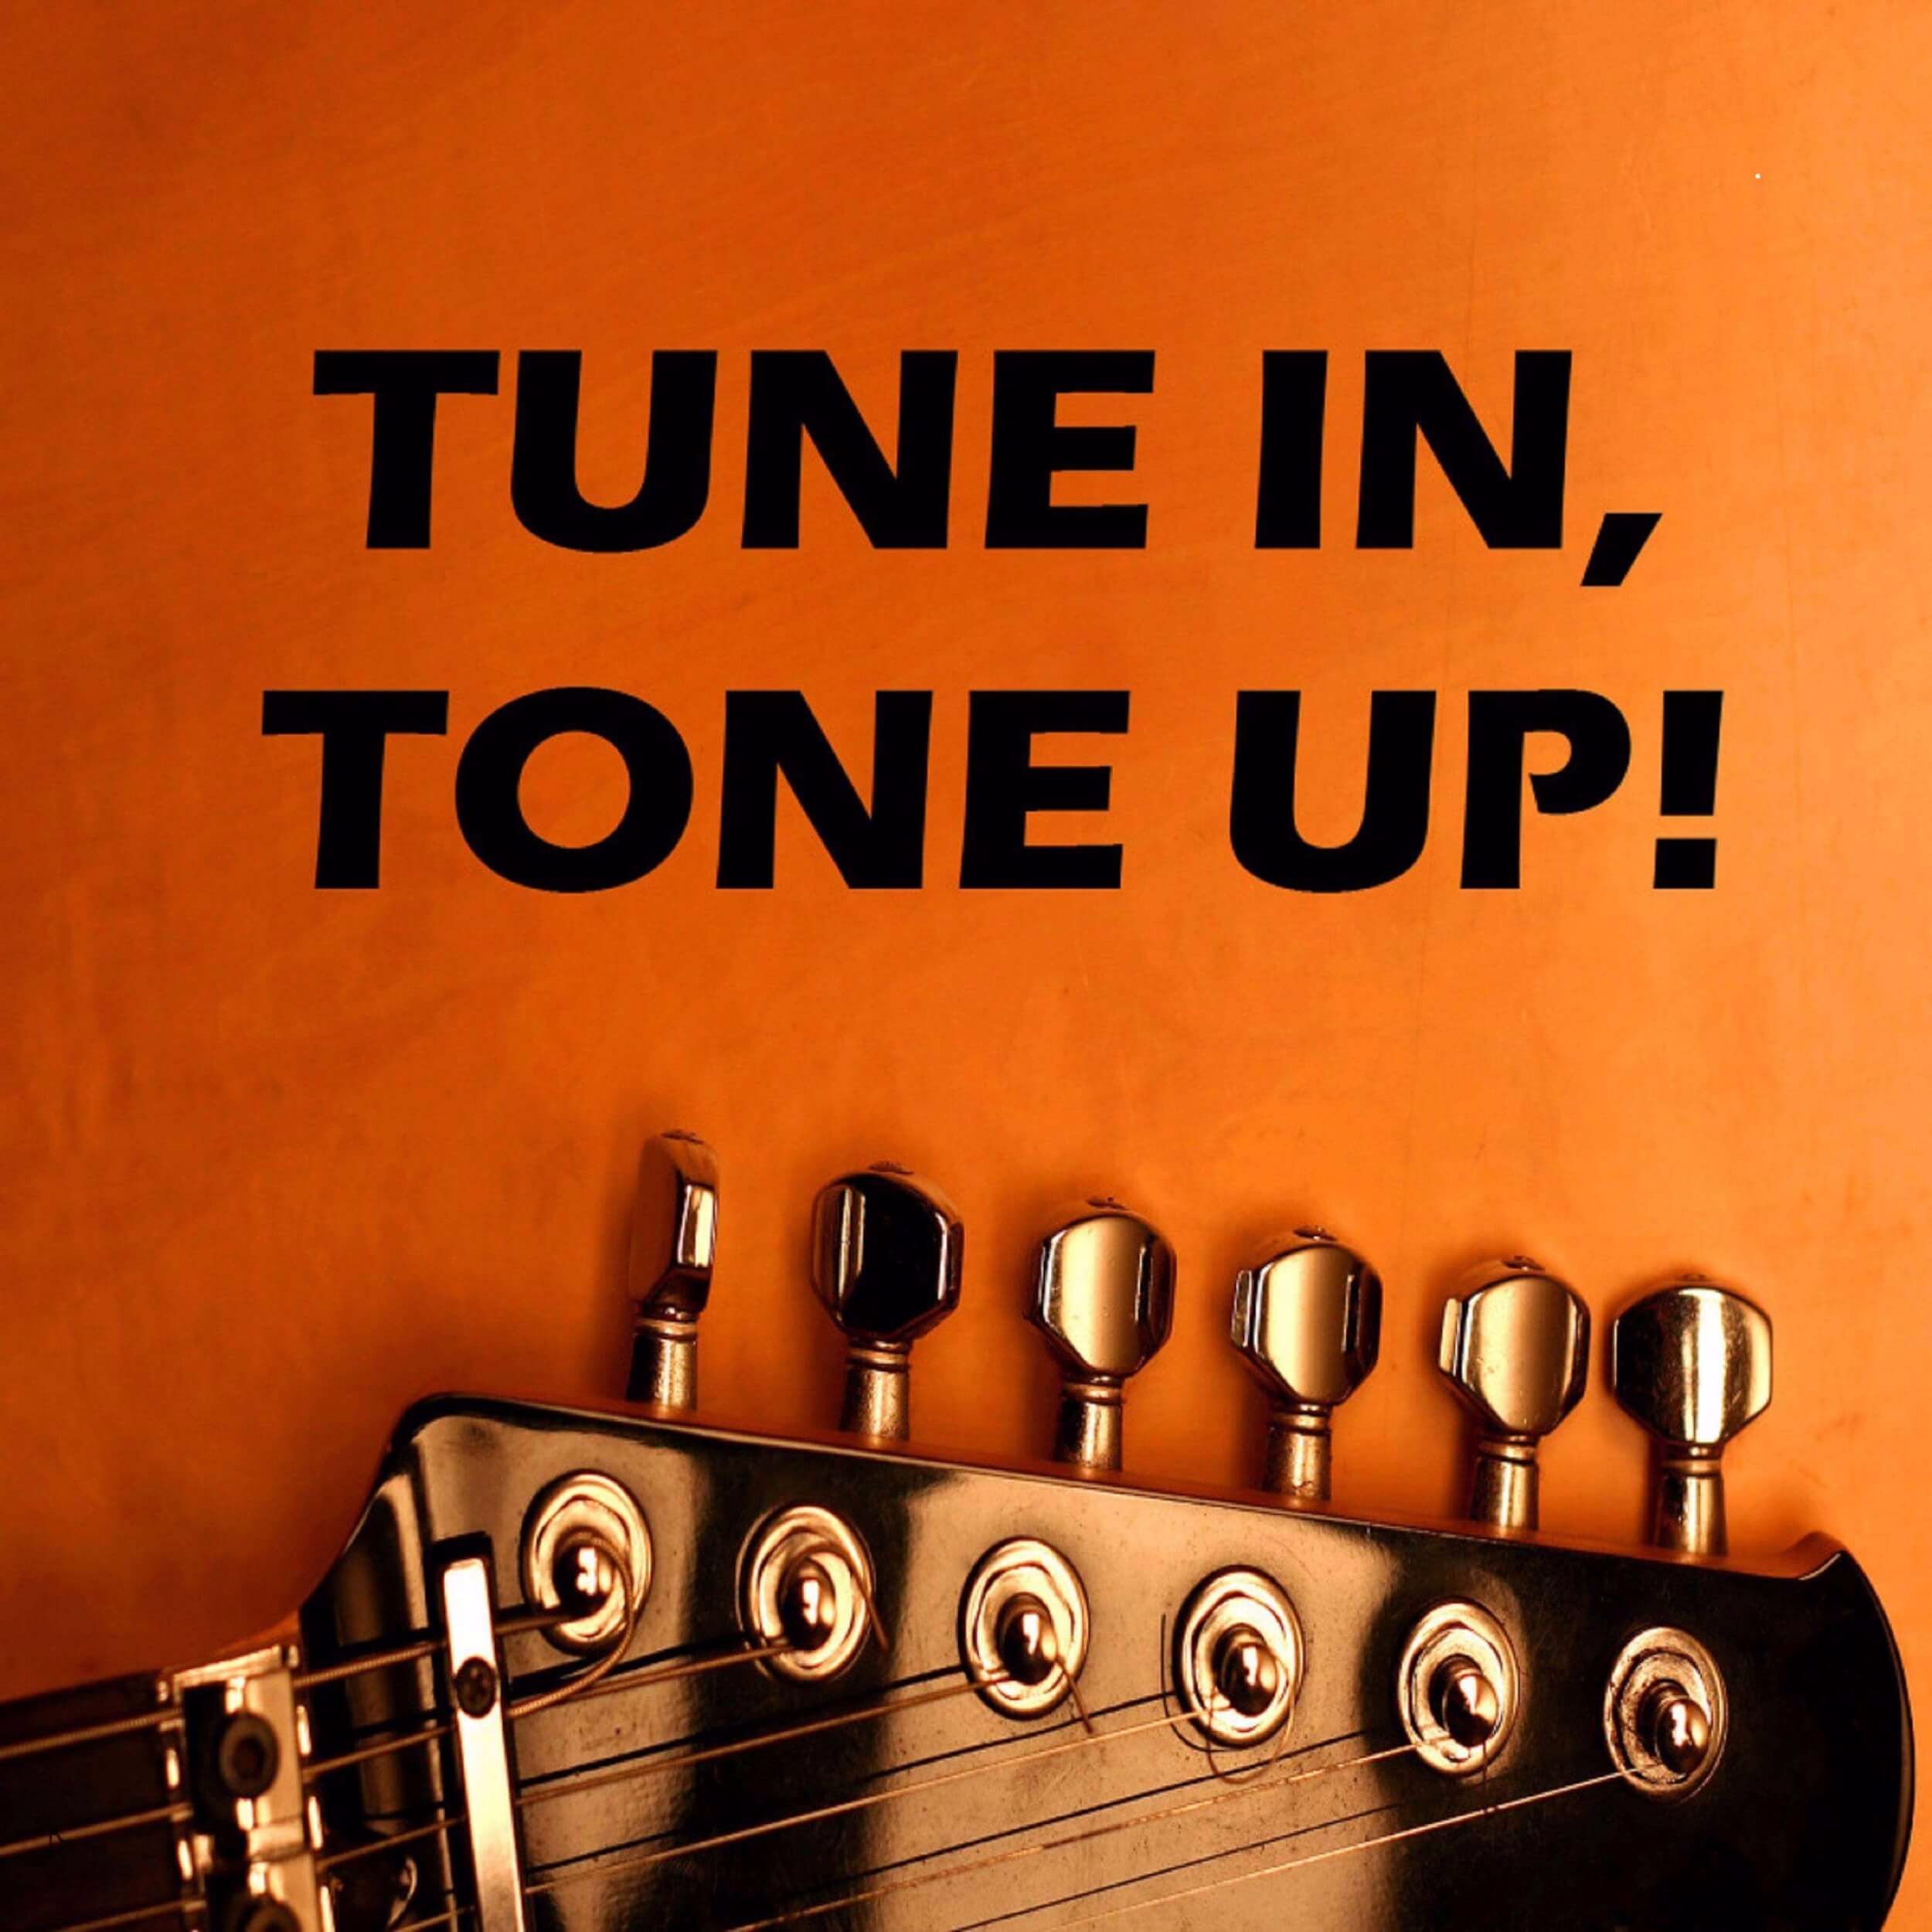 Guitar Lessons With Tune In Tone Up Listen Via Stitcher For Podcasts 